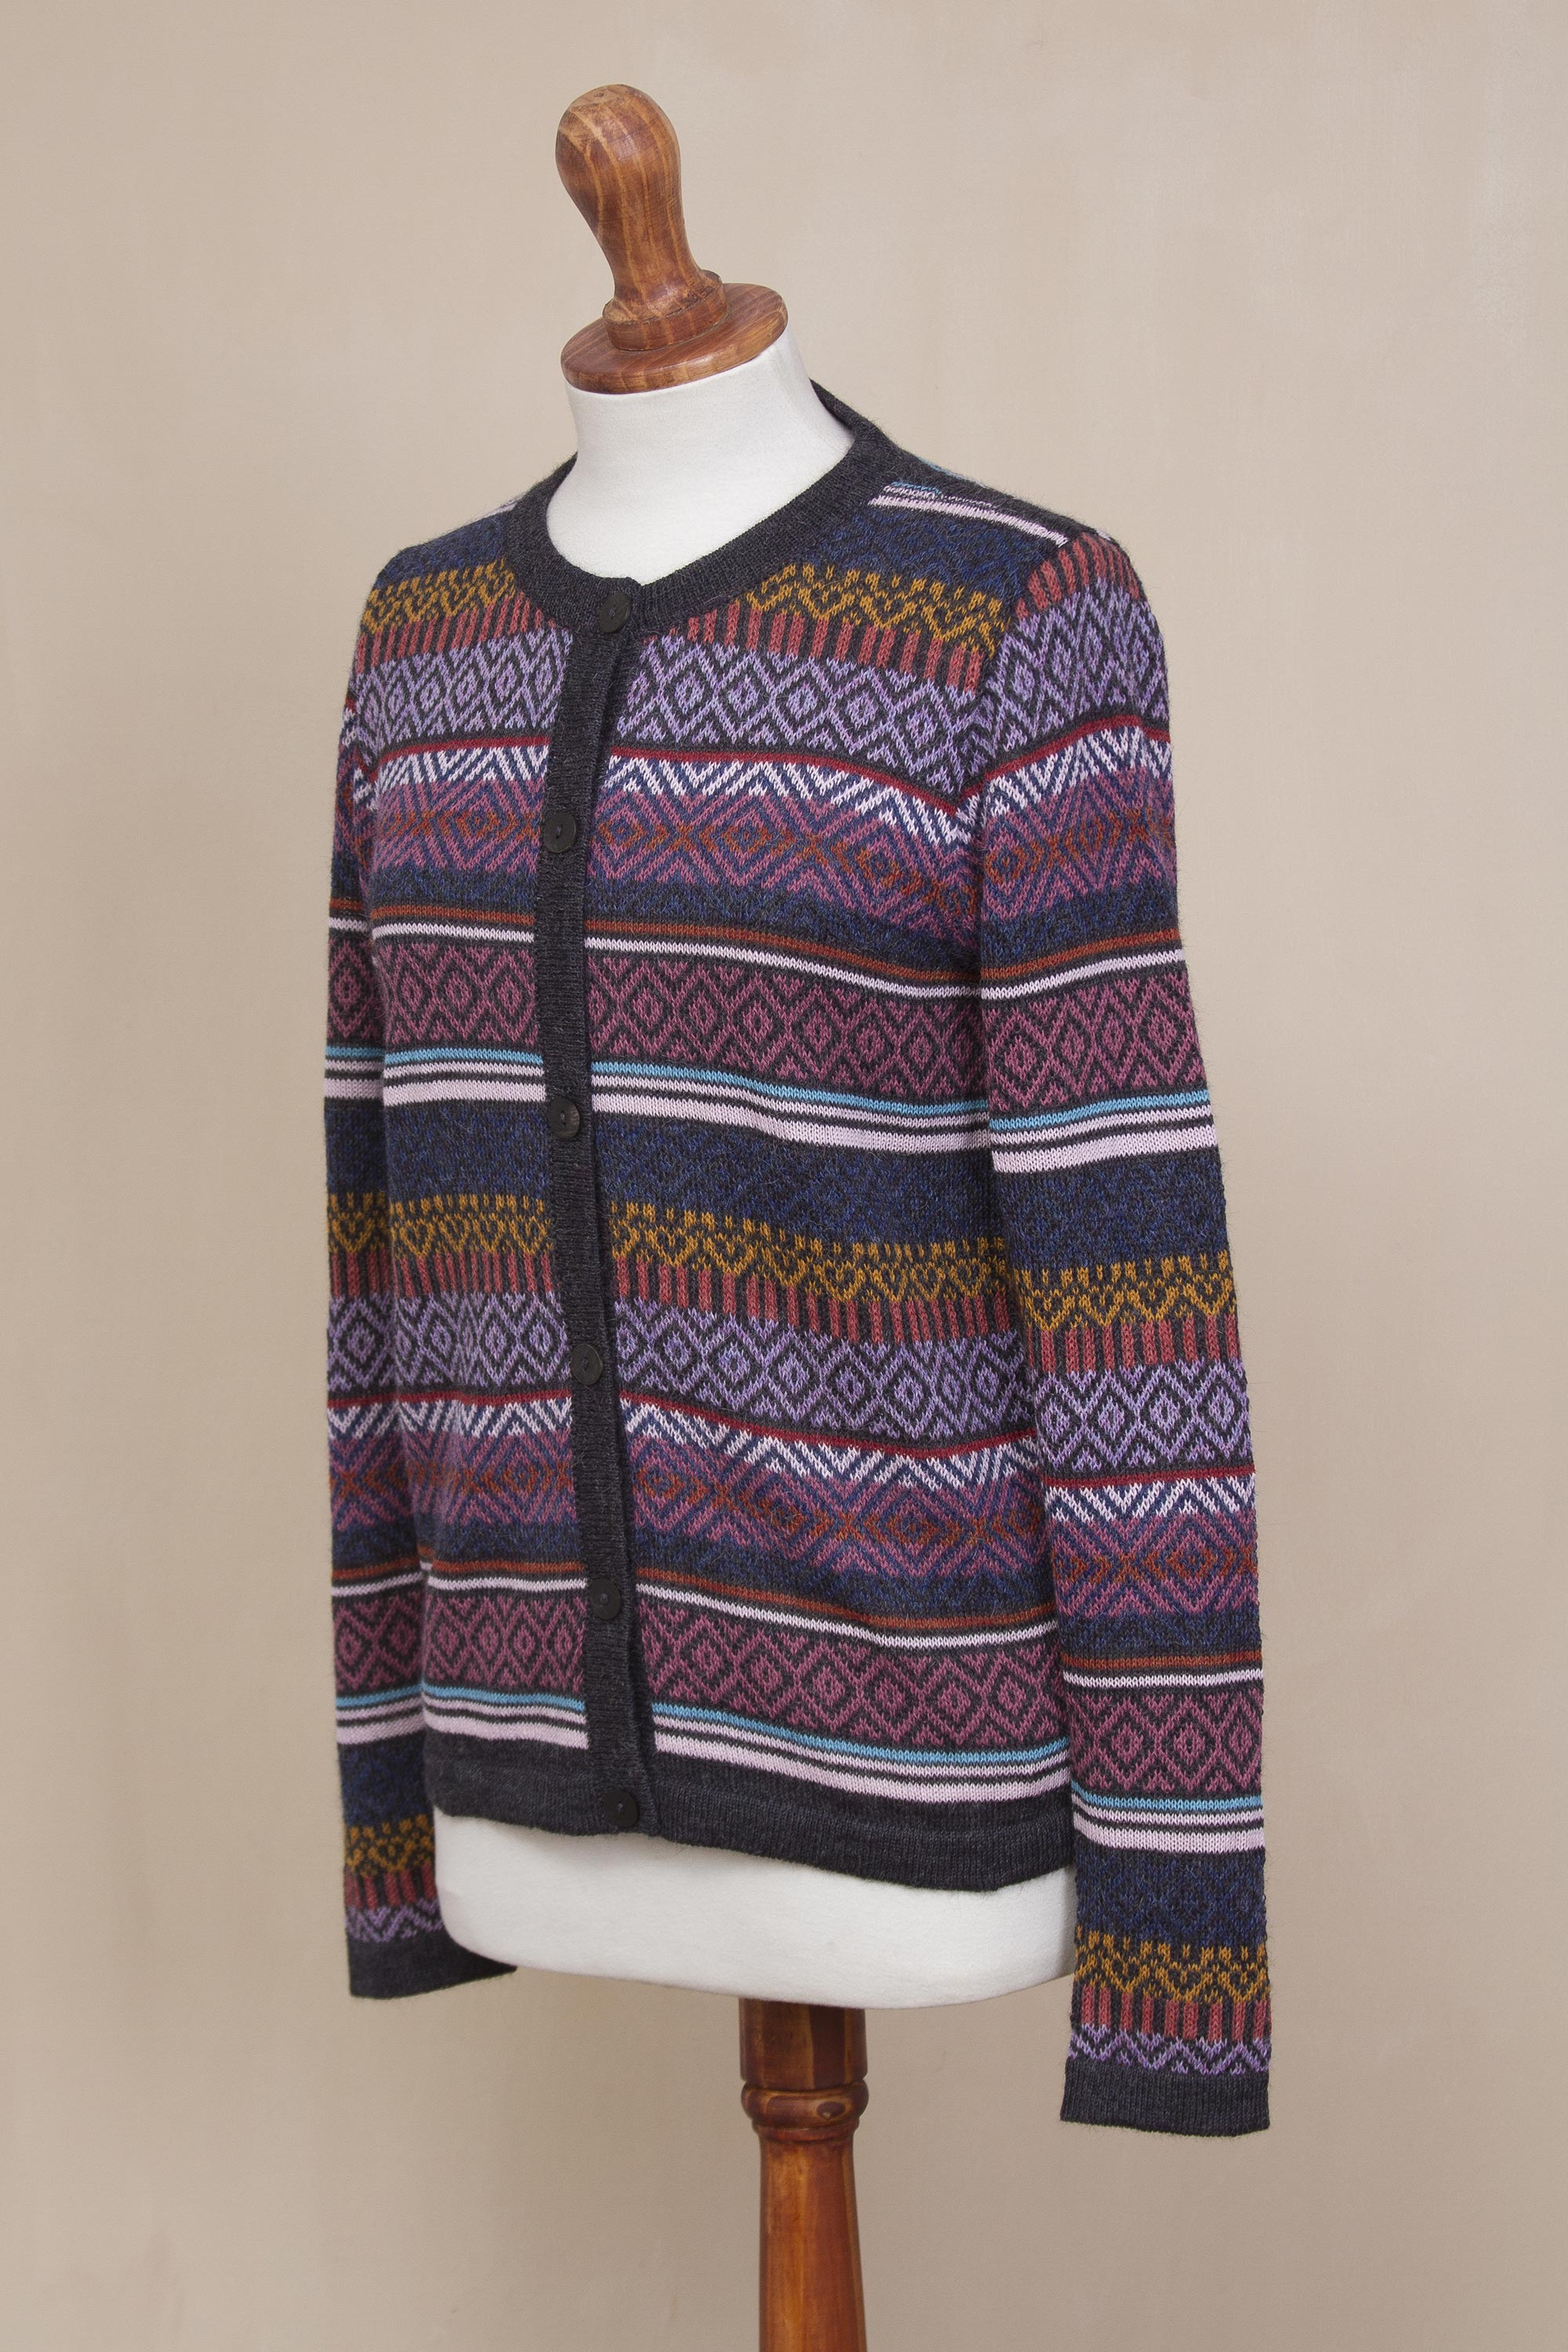 Multicolored 100% Alpaca Cardigan with Wood Buttons - Vibrant Life | NOVICA